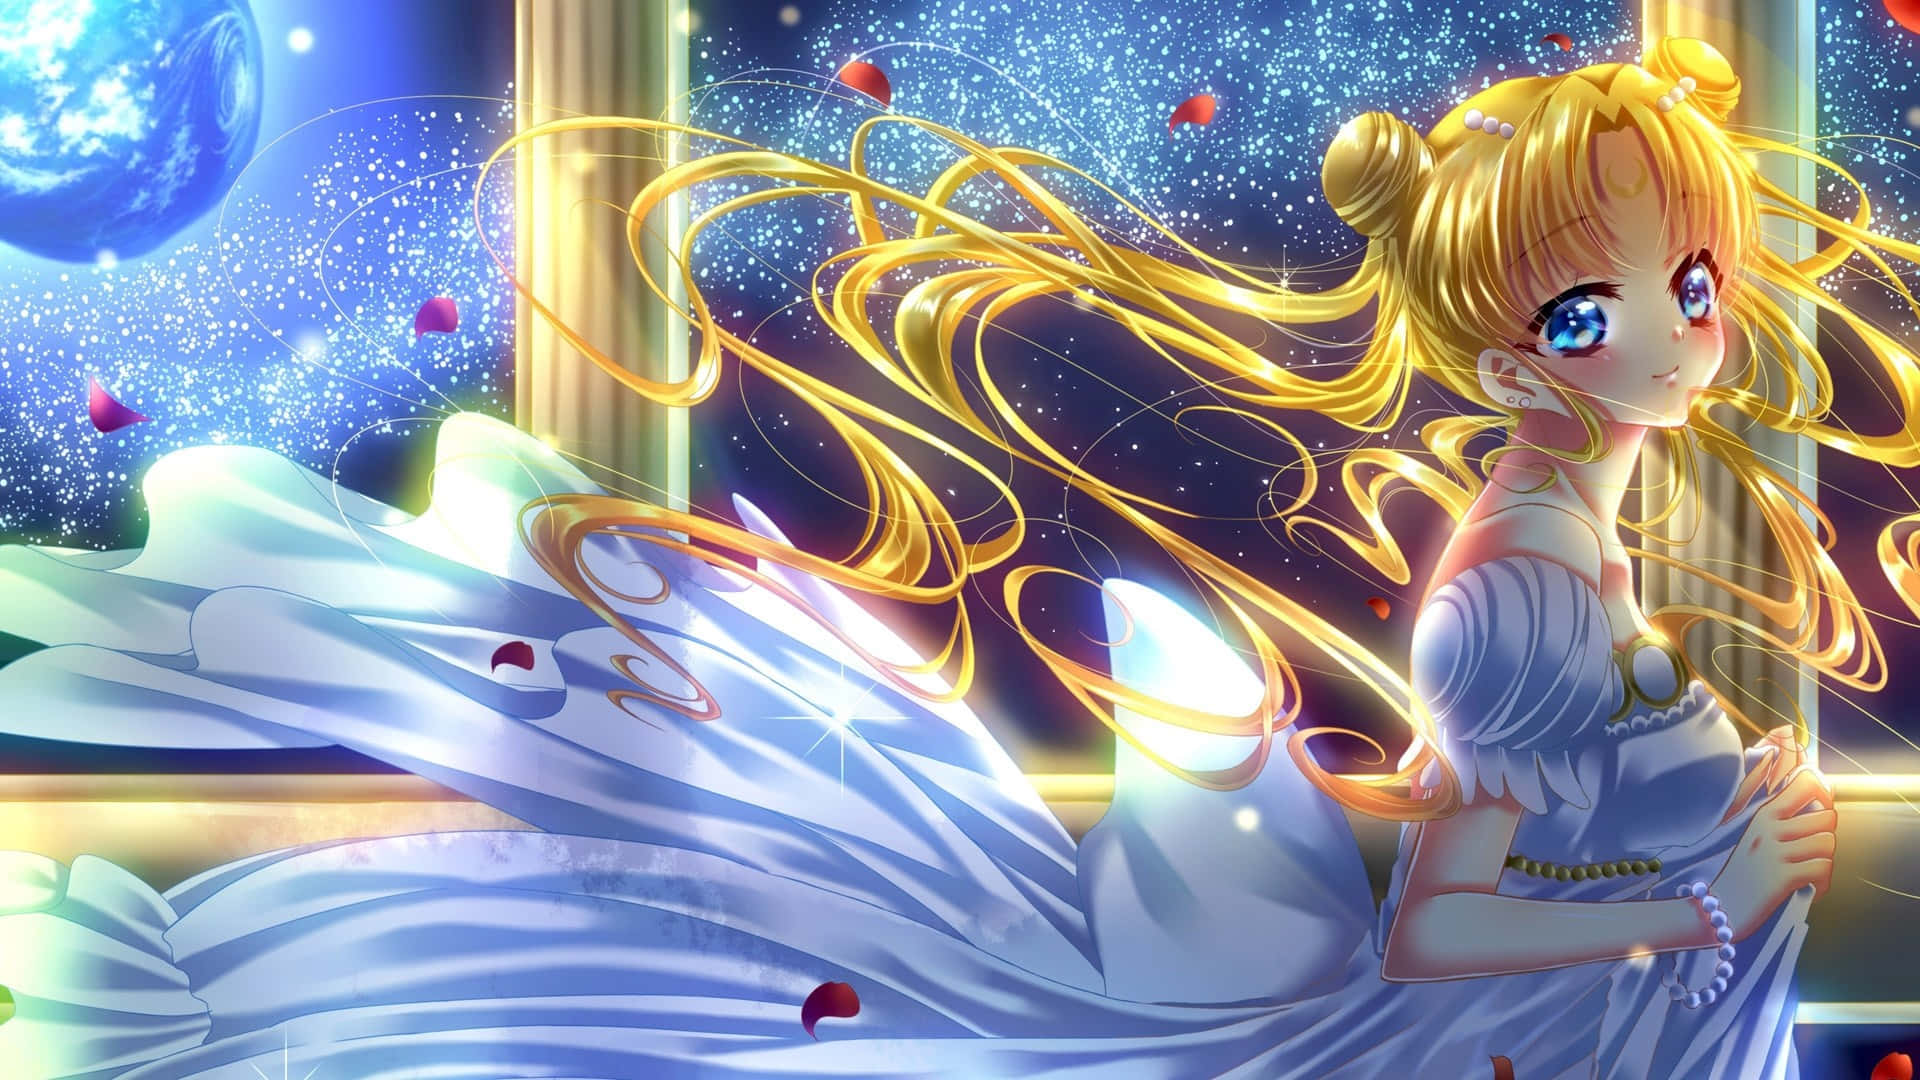 The sailor guardians fight to protect the world in Sailor Moon